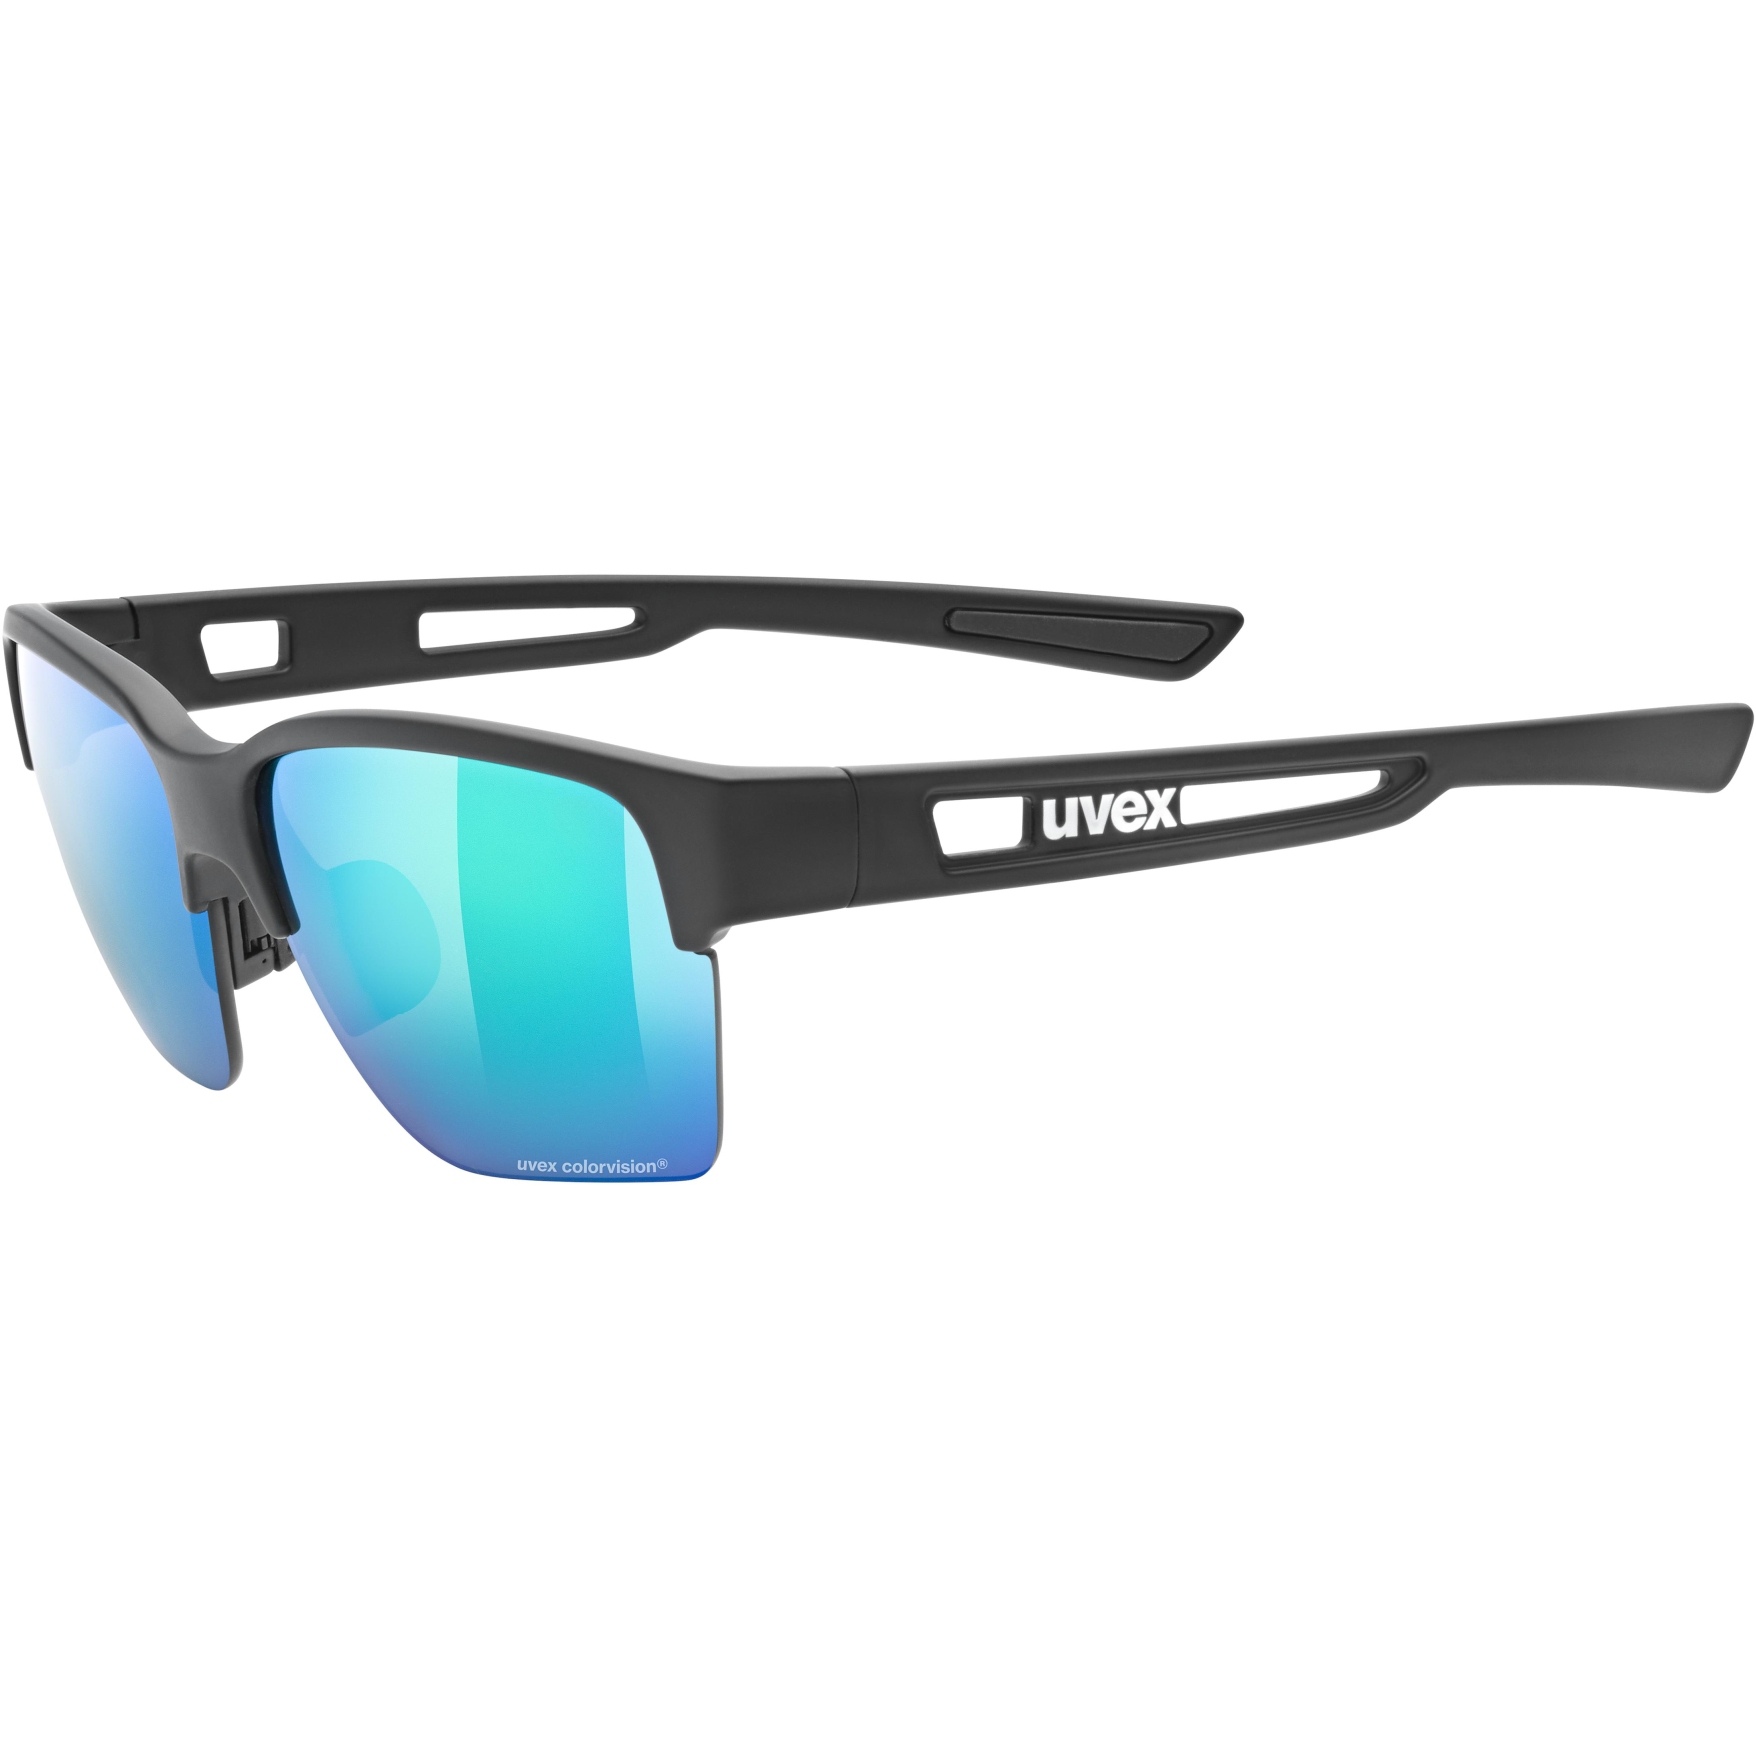 Picture of Uvex sportstyle 805 CV Glasses - black mat/colorvision mirror green